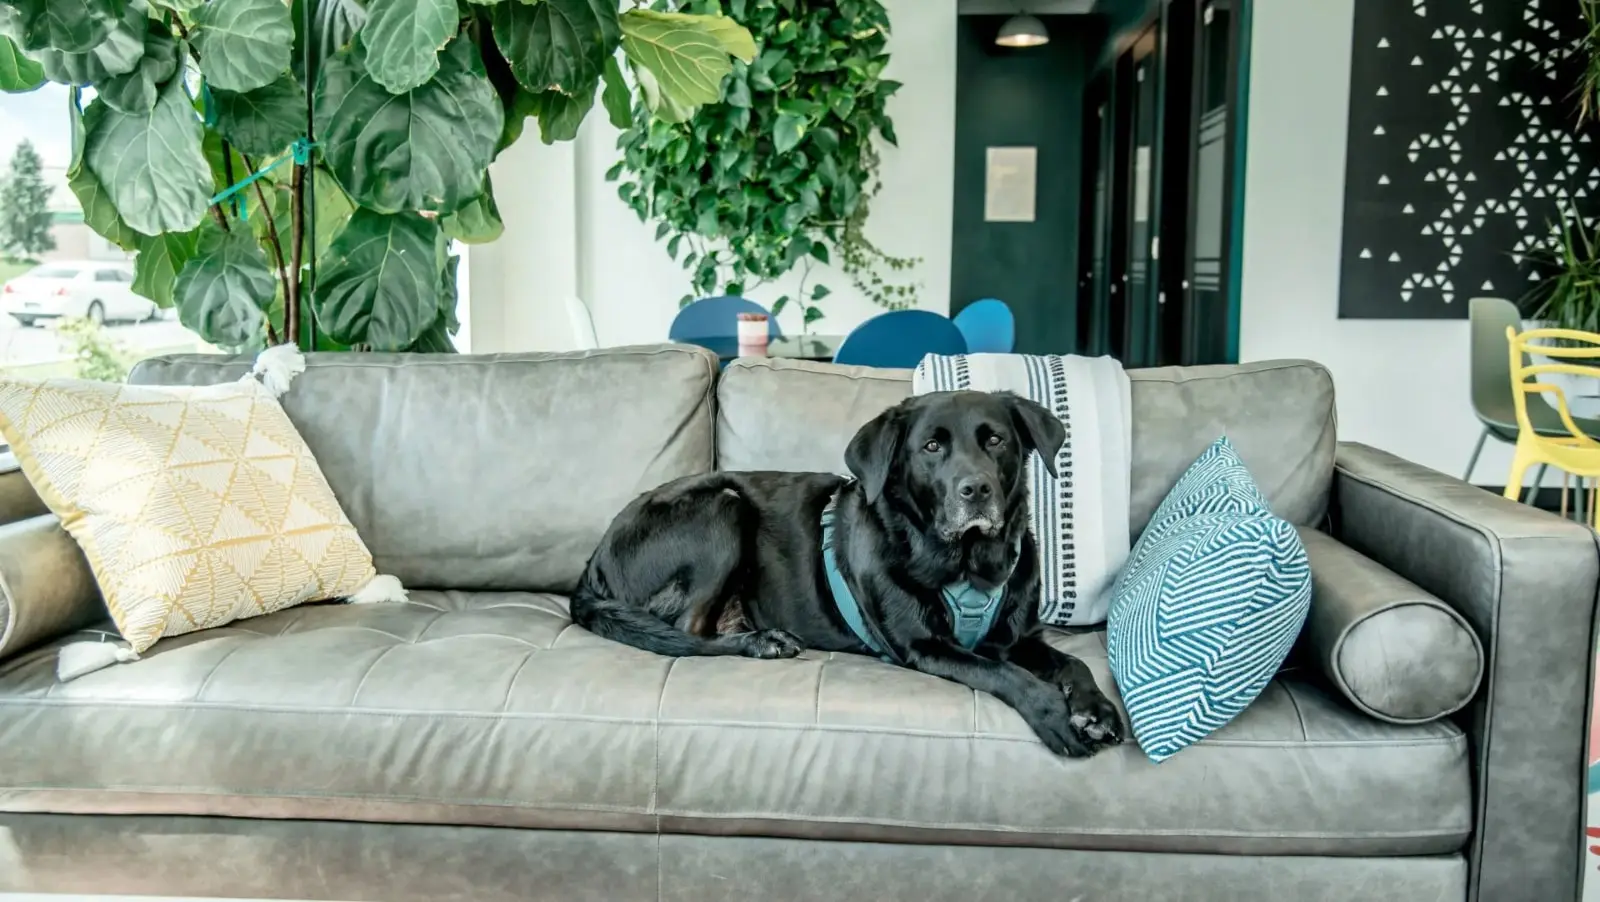 Fractal Workspace is a Pet Friendly Coworking Space